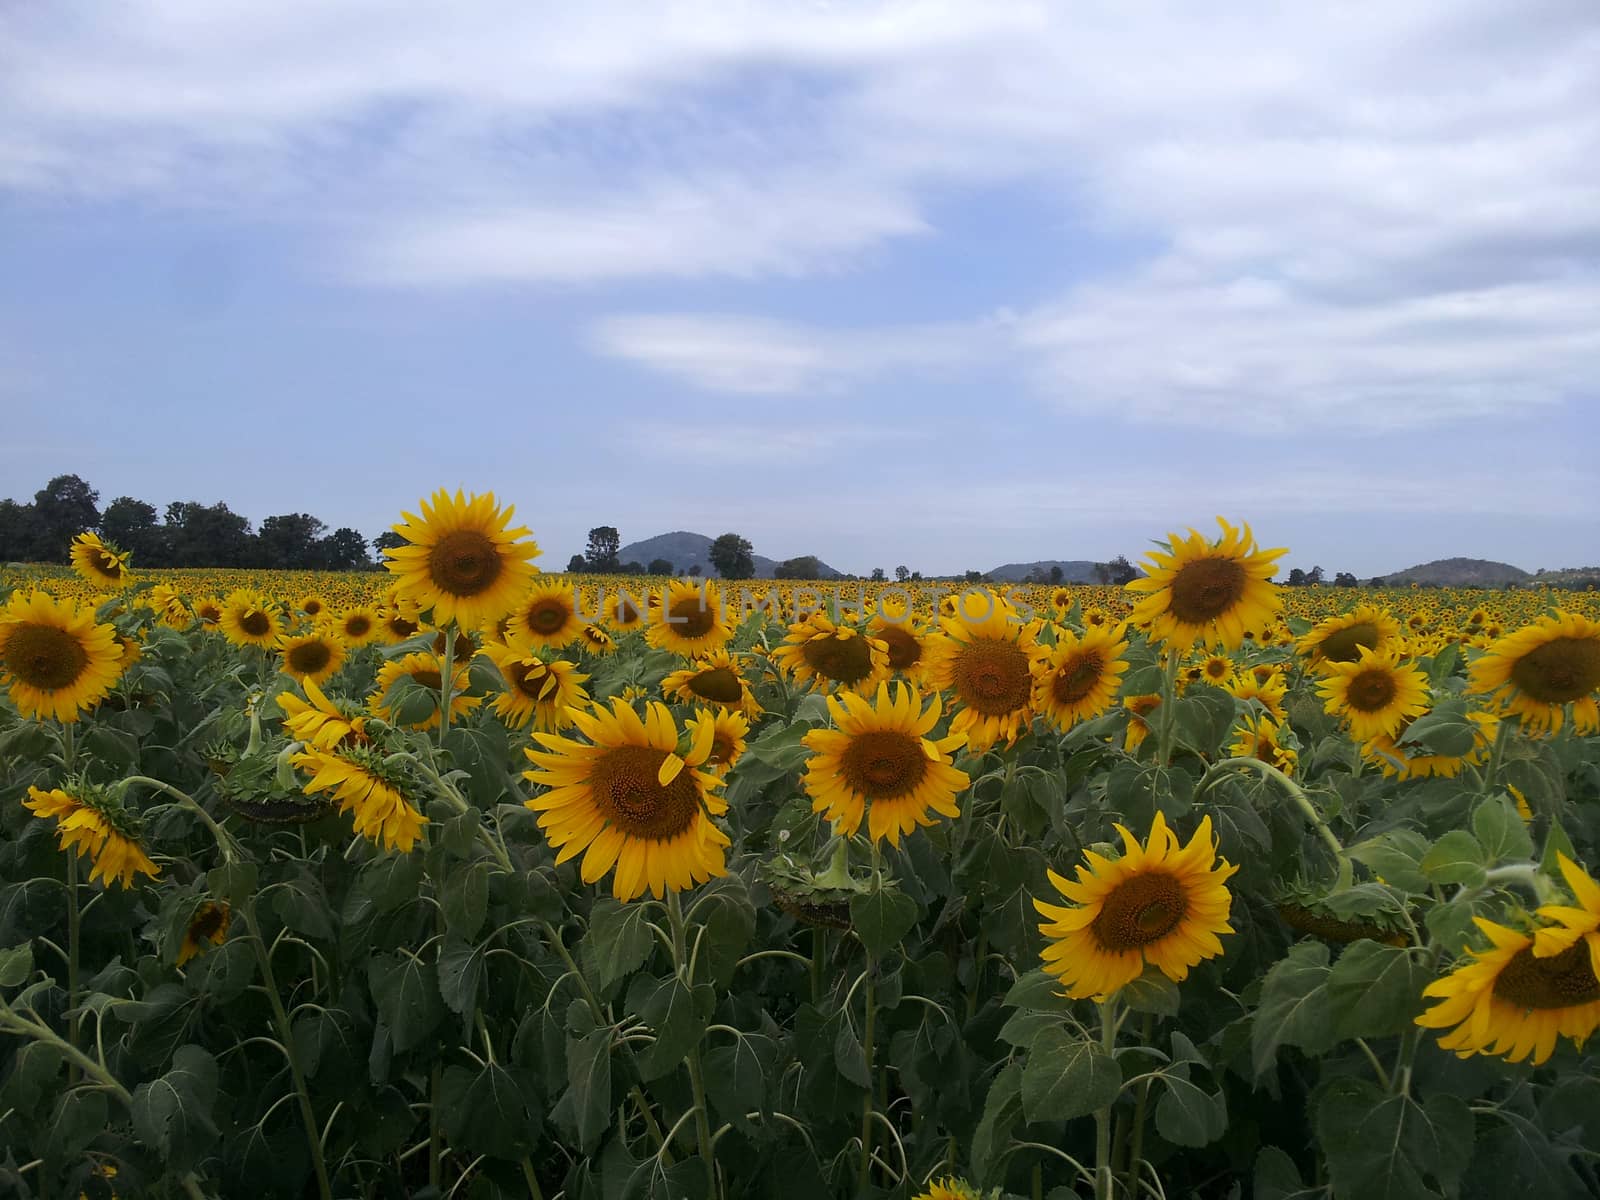 Sunflower field with cloudy sky.